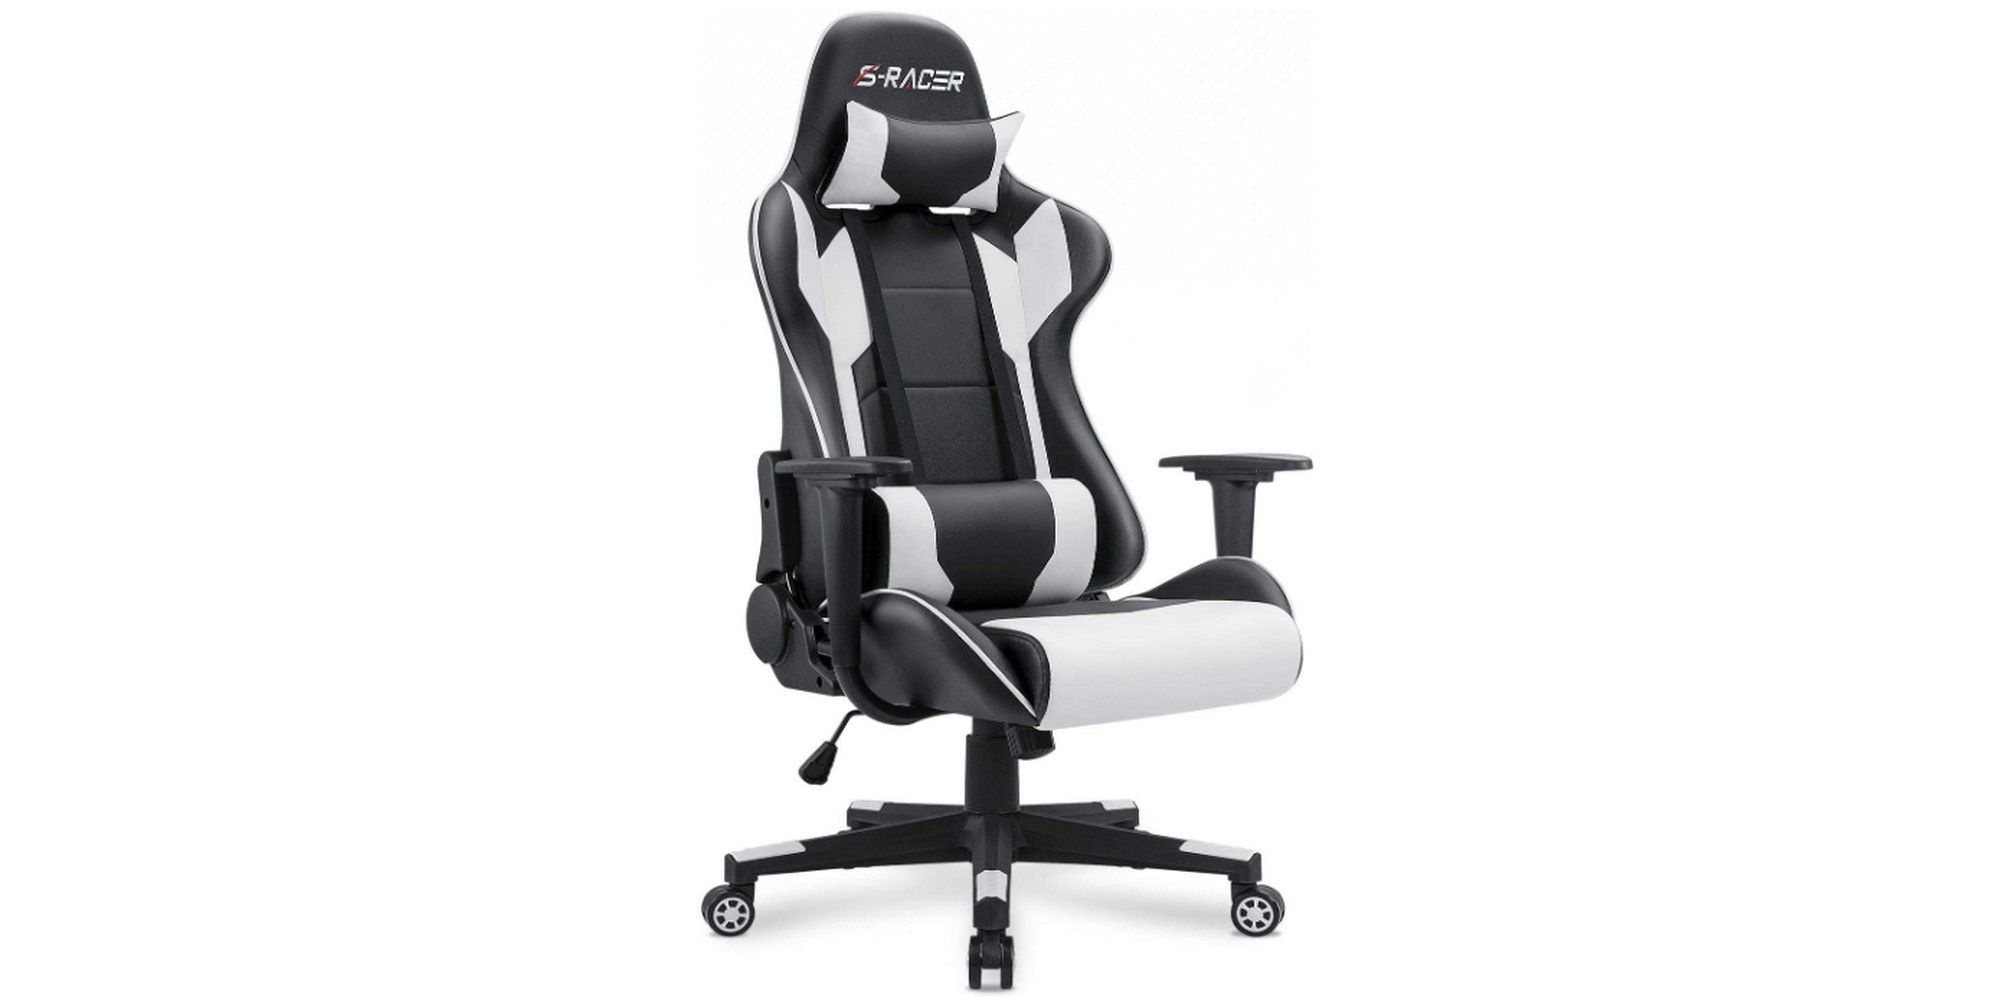 homall s-racer gaming chair buyer's guide black and white